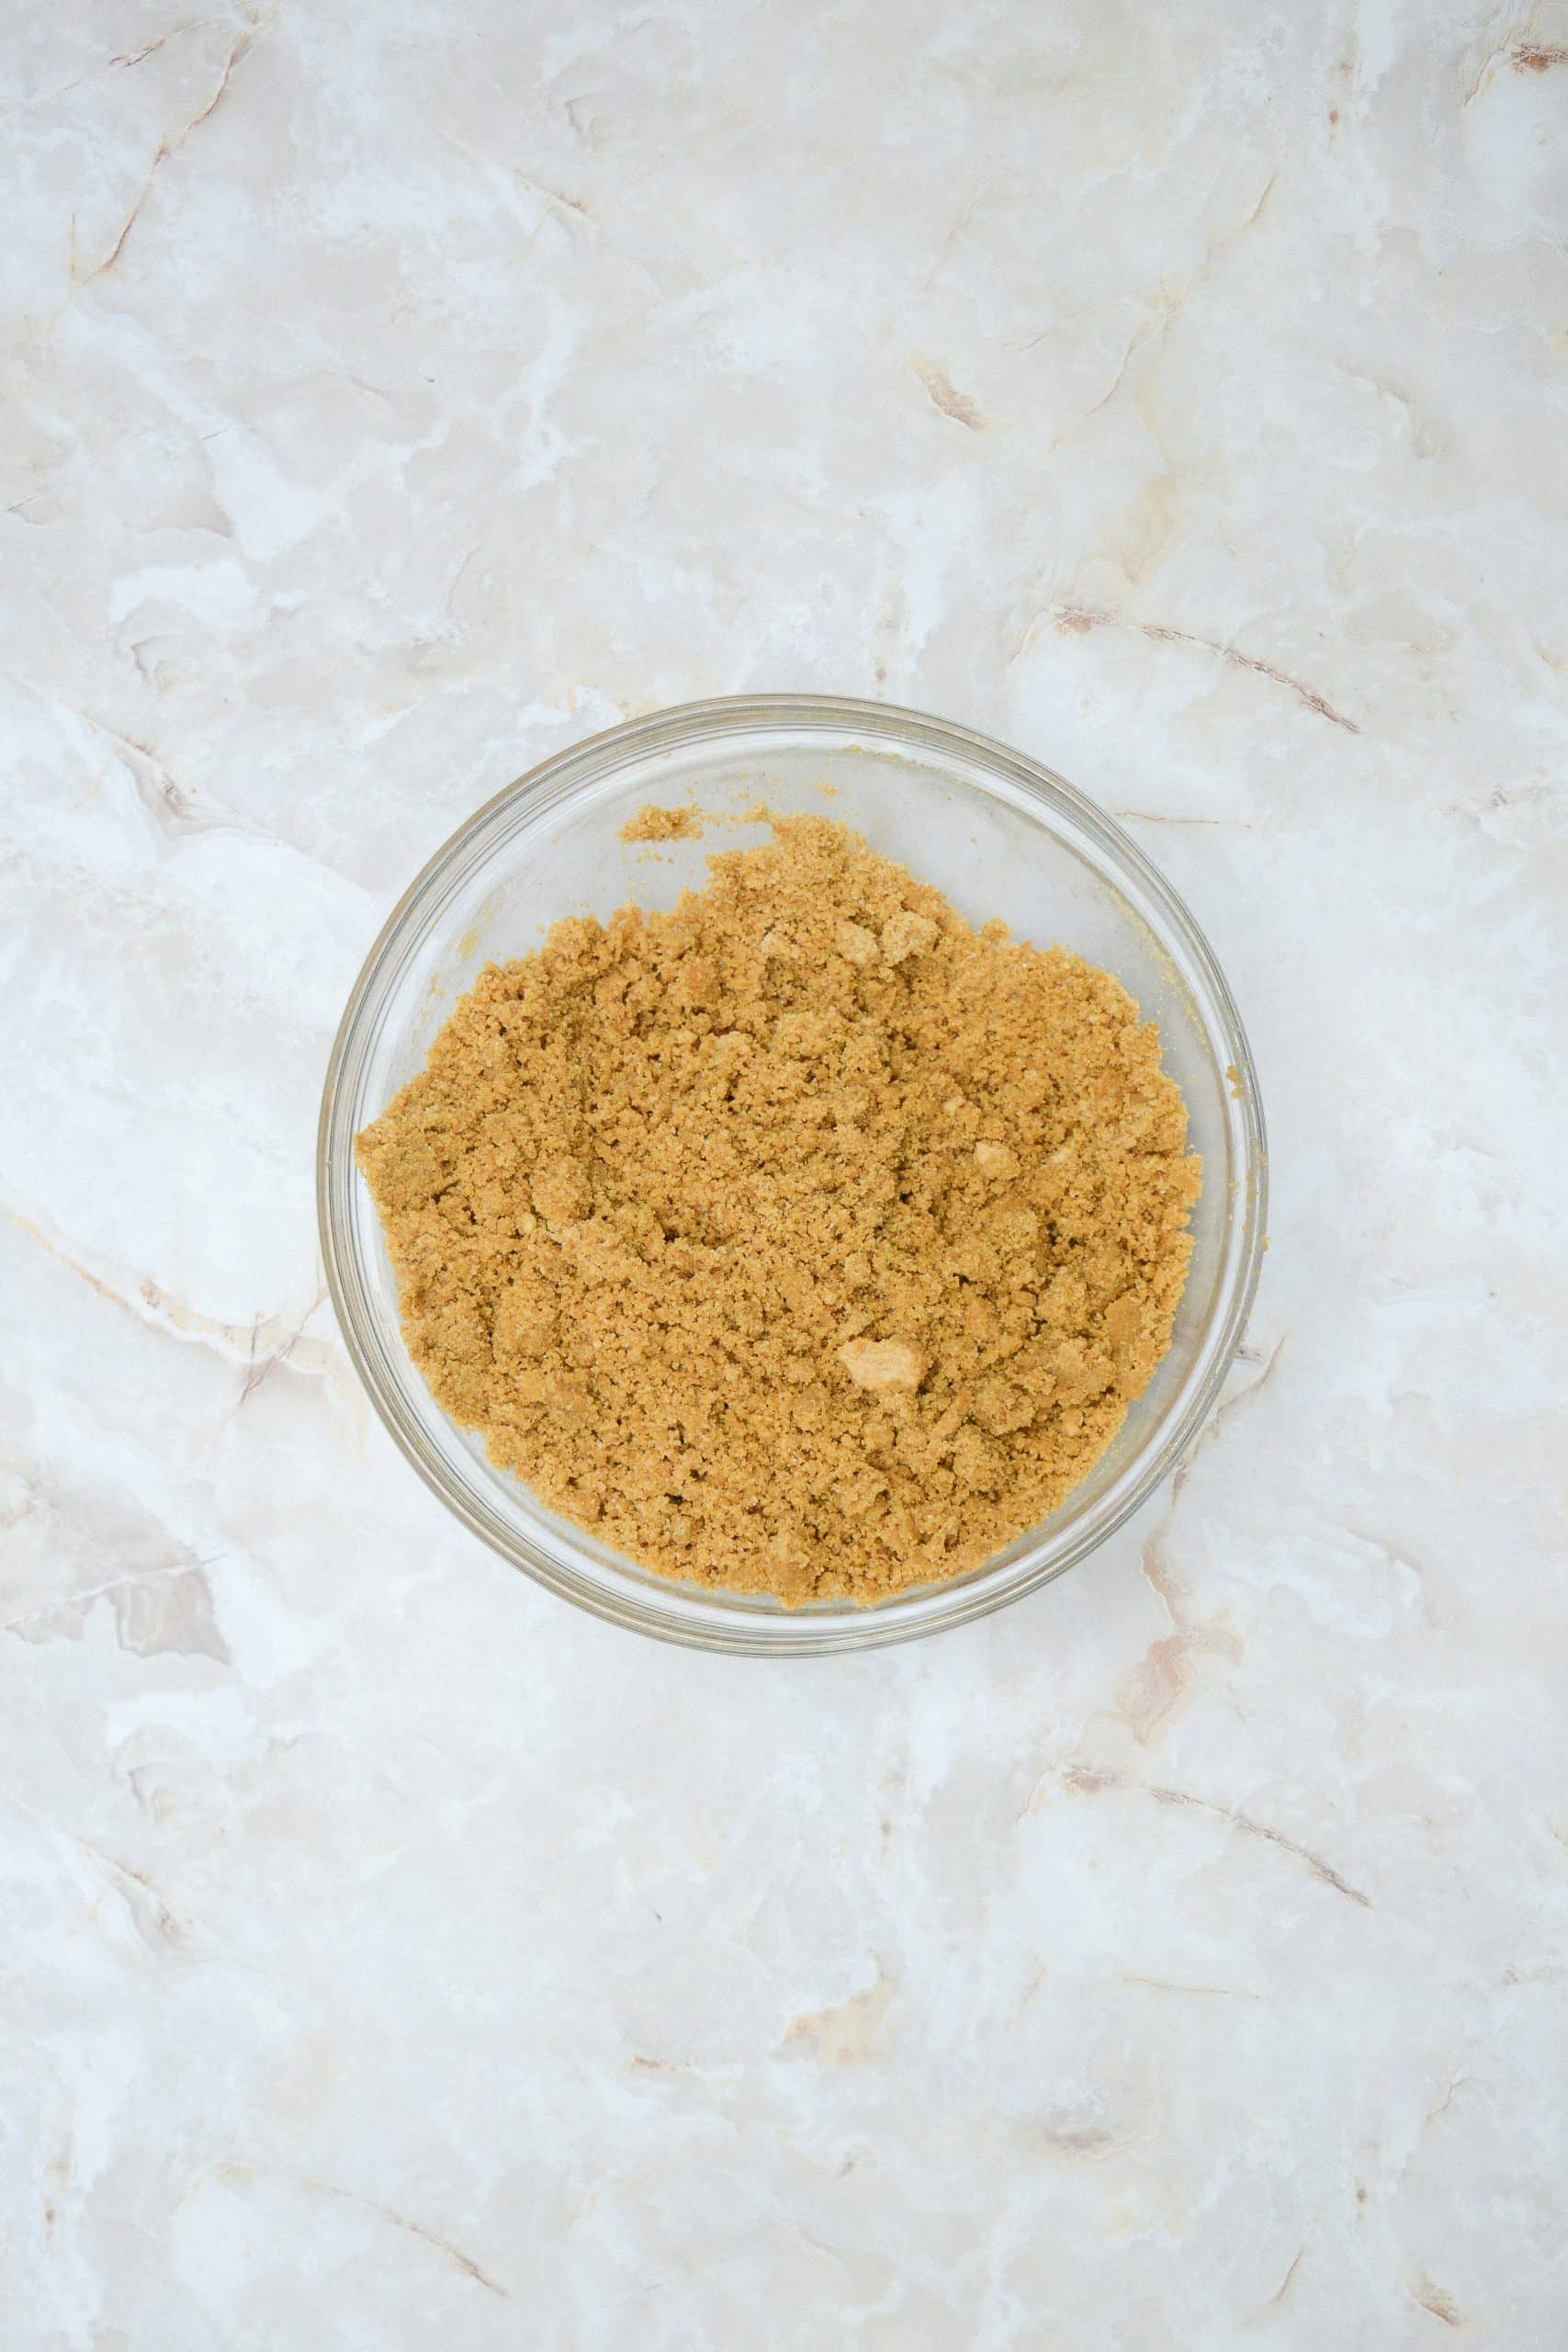 buttered graham cracker crumbs in a glass mixing bowl